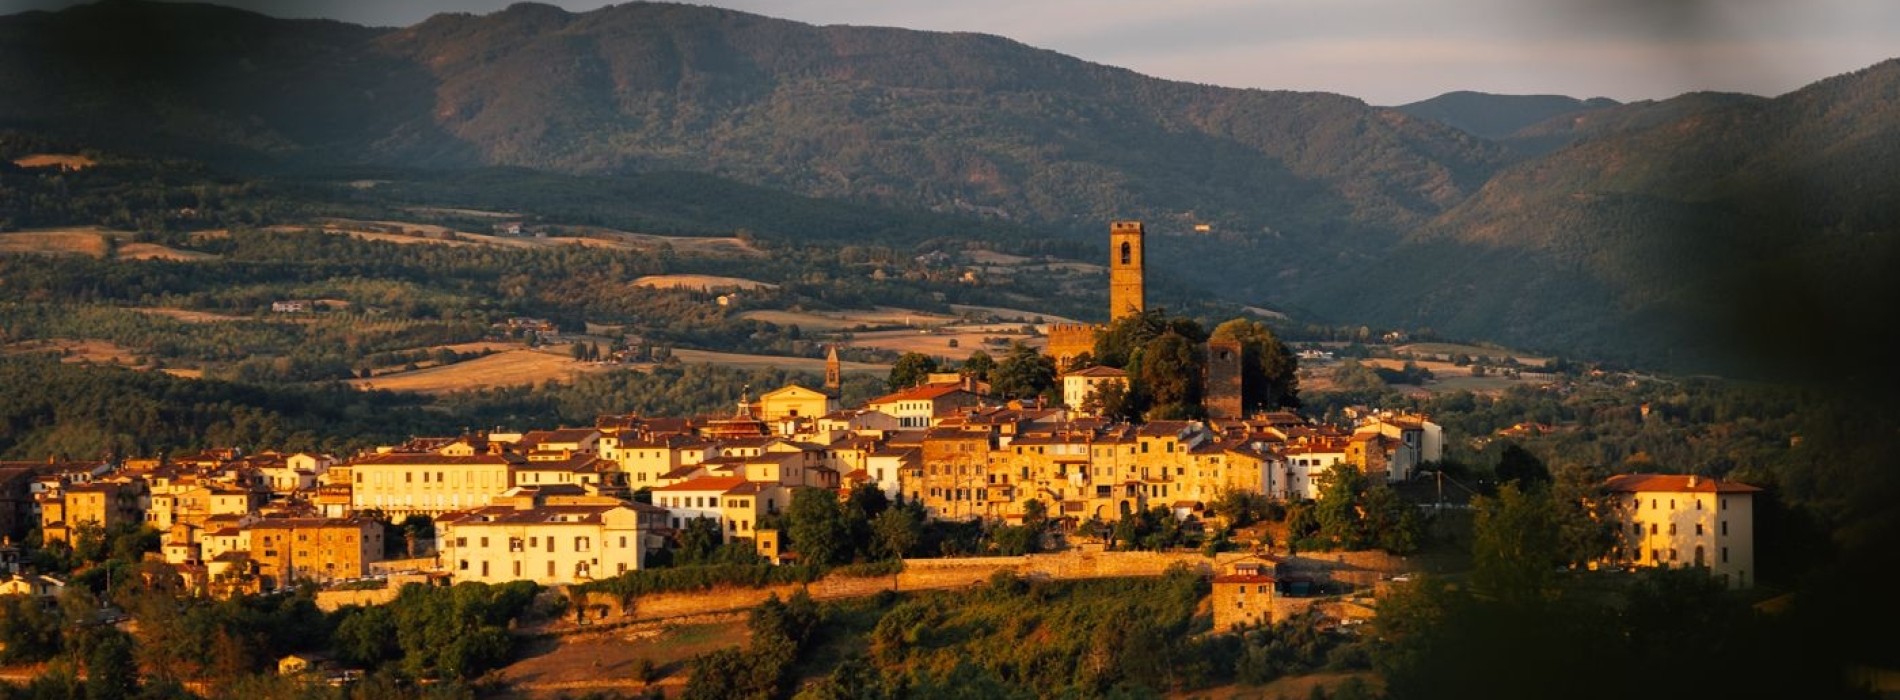 So many lovely places to visit in Tuscany when you are not cooking!